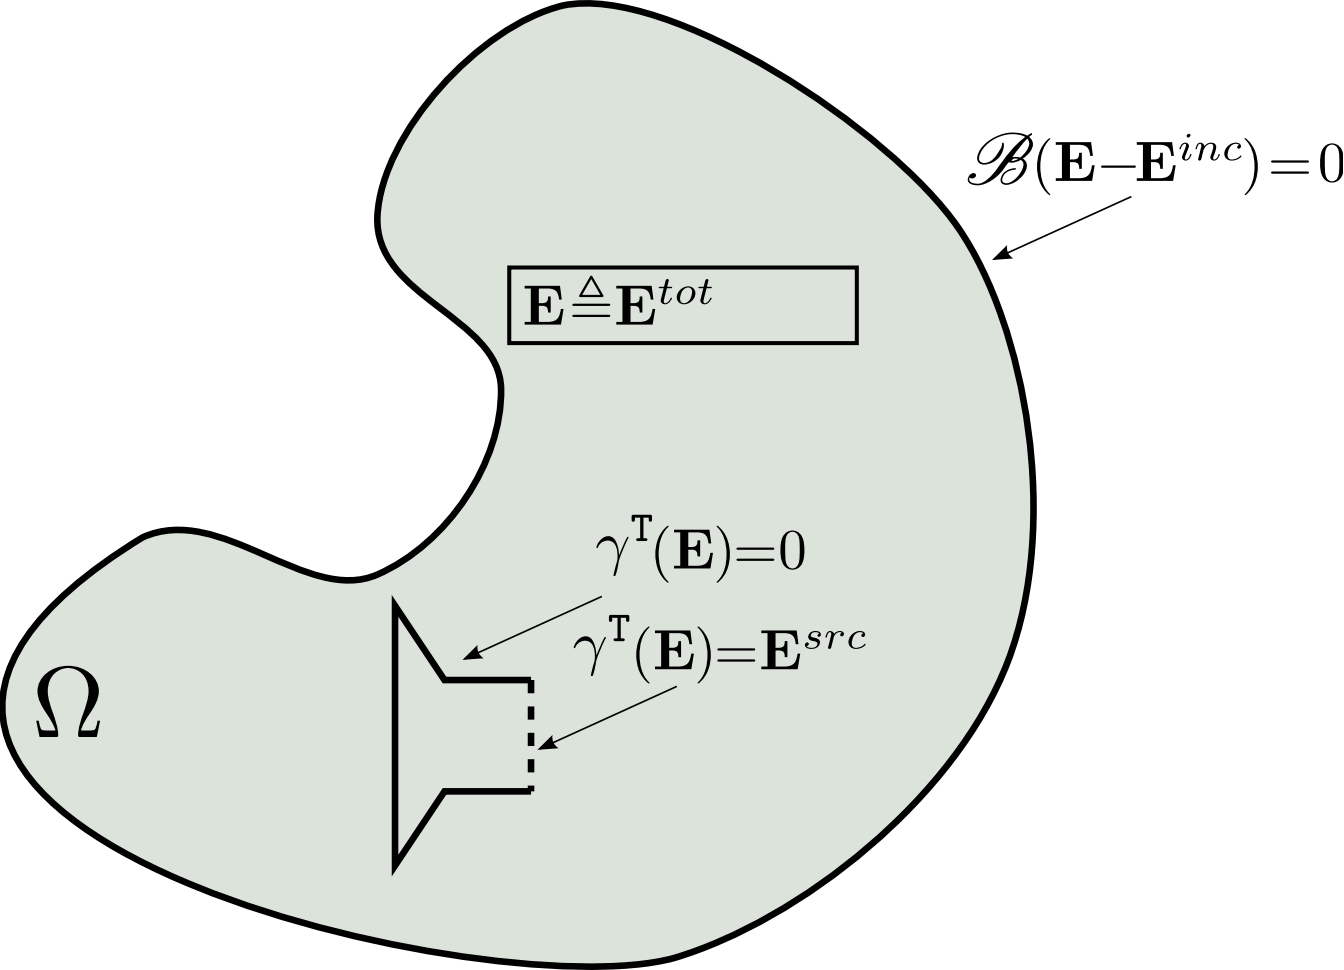 Diagram showing a complete circuit model for the via cell.